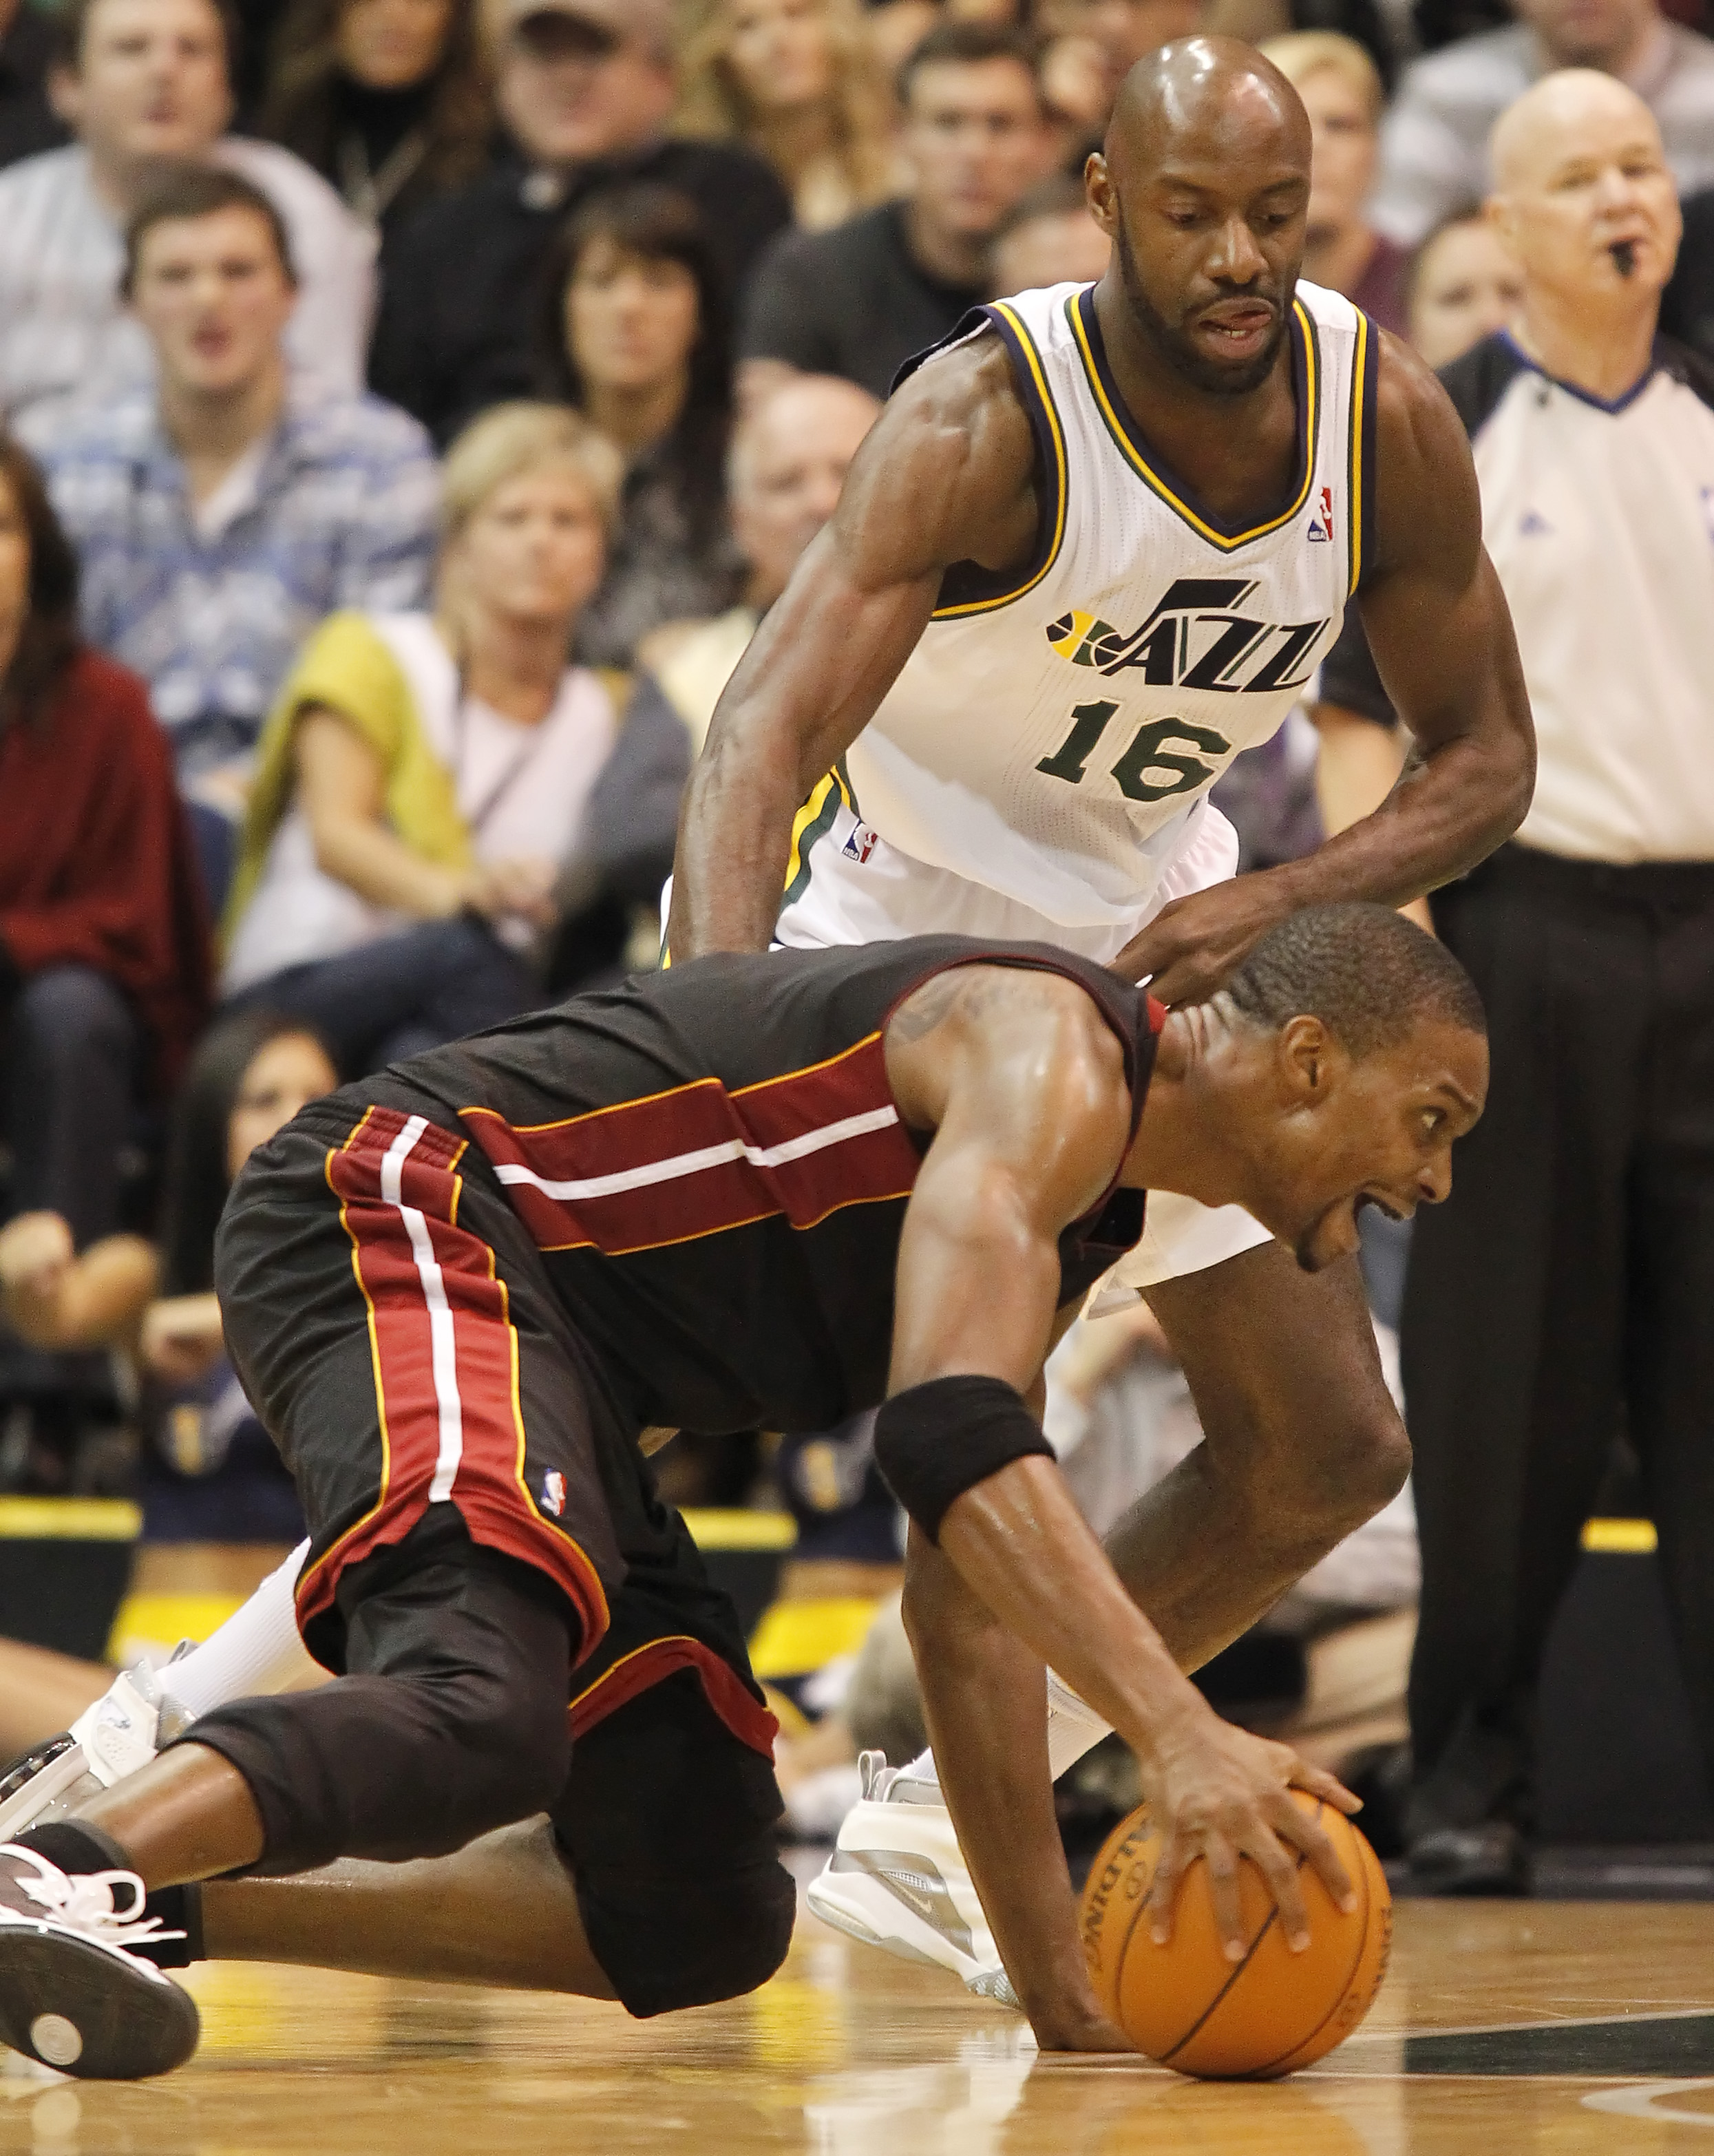 SALT LAKE CITY, UT - DECEMBER 8: Chris Bosh #1 of the Miami Heat falls to the ground as Francisco Elson #16 of the Utah Jazz during the second half of an NBA game December 8, 2010 at Energy Solutions Arena in Salt Lake City, Utah. The Heat beat the Jazz 1